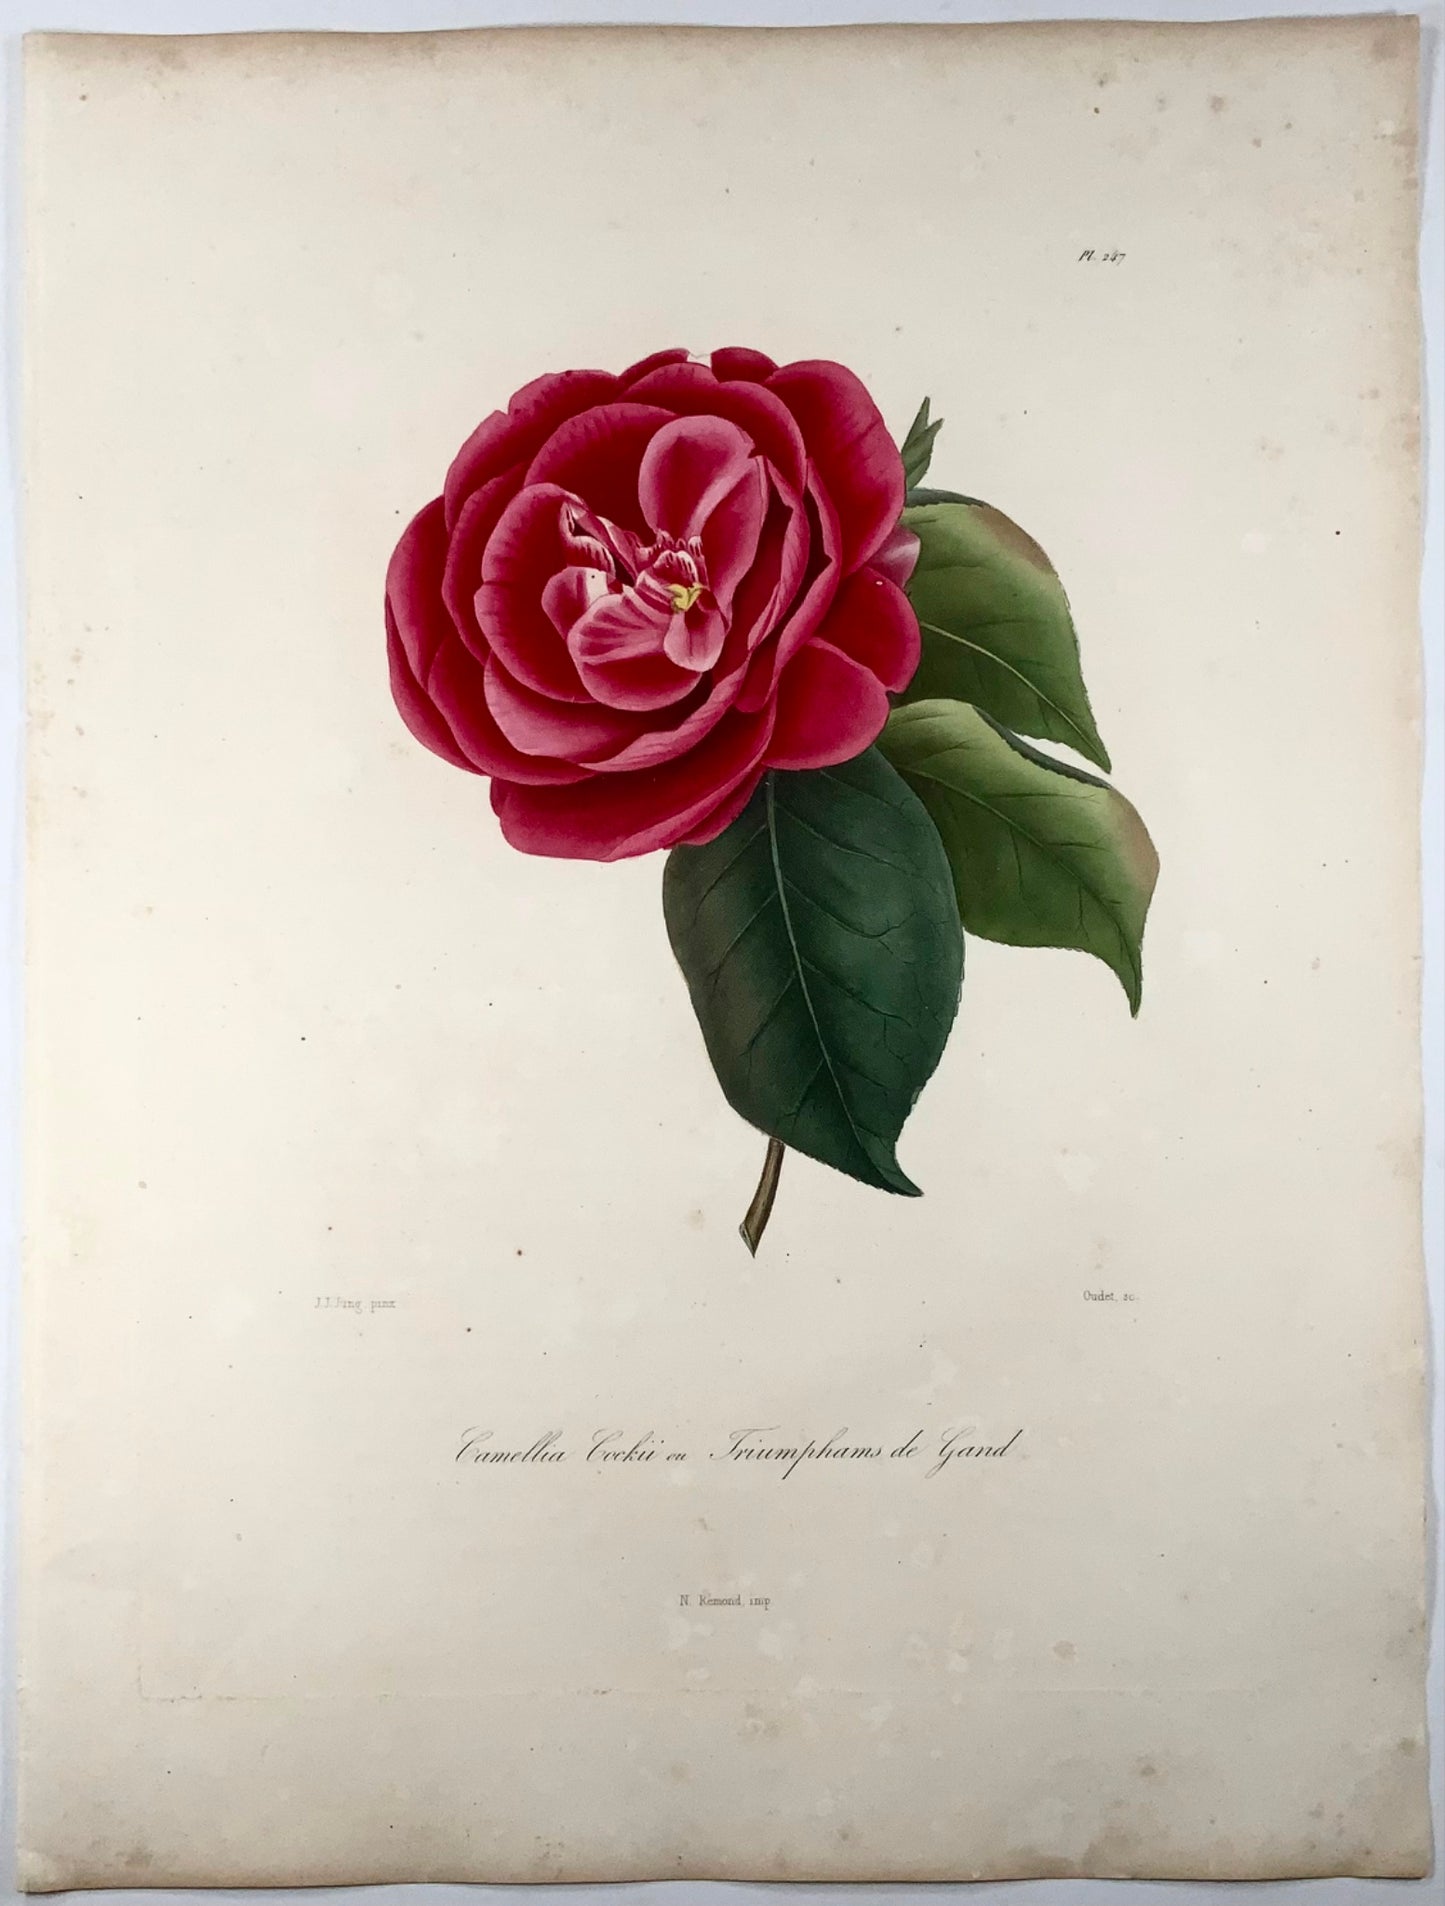 1841 Camellia Cockii, botany, drawn by J J Jung, engraved by Oudet, Berlèse